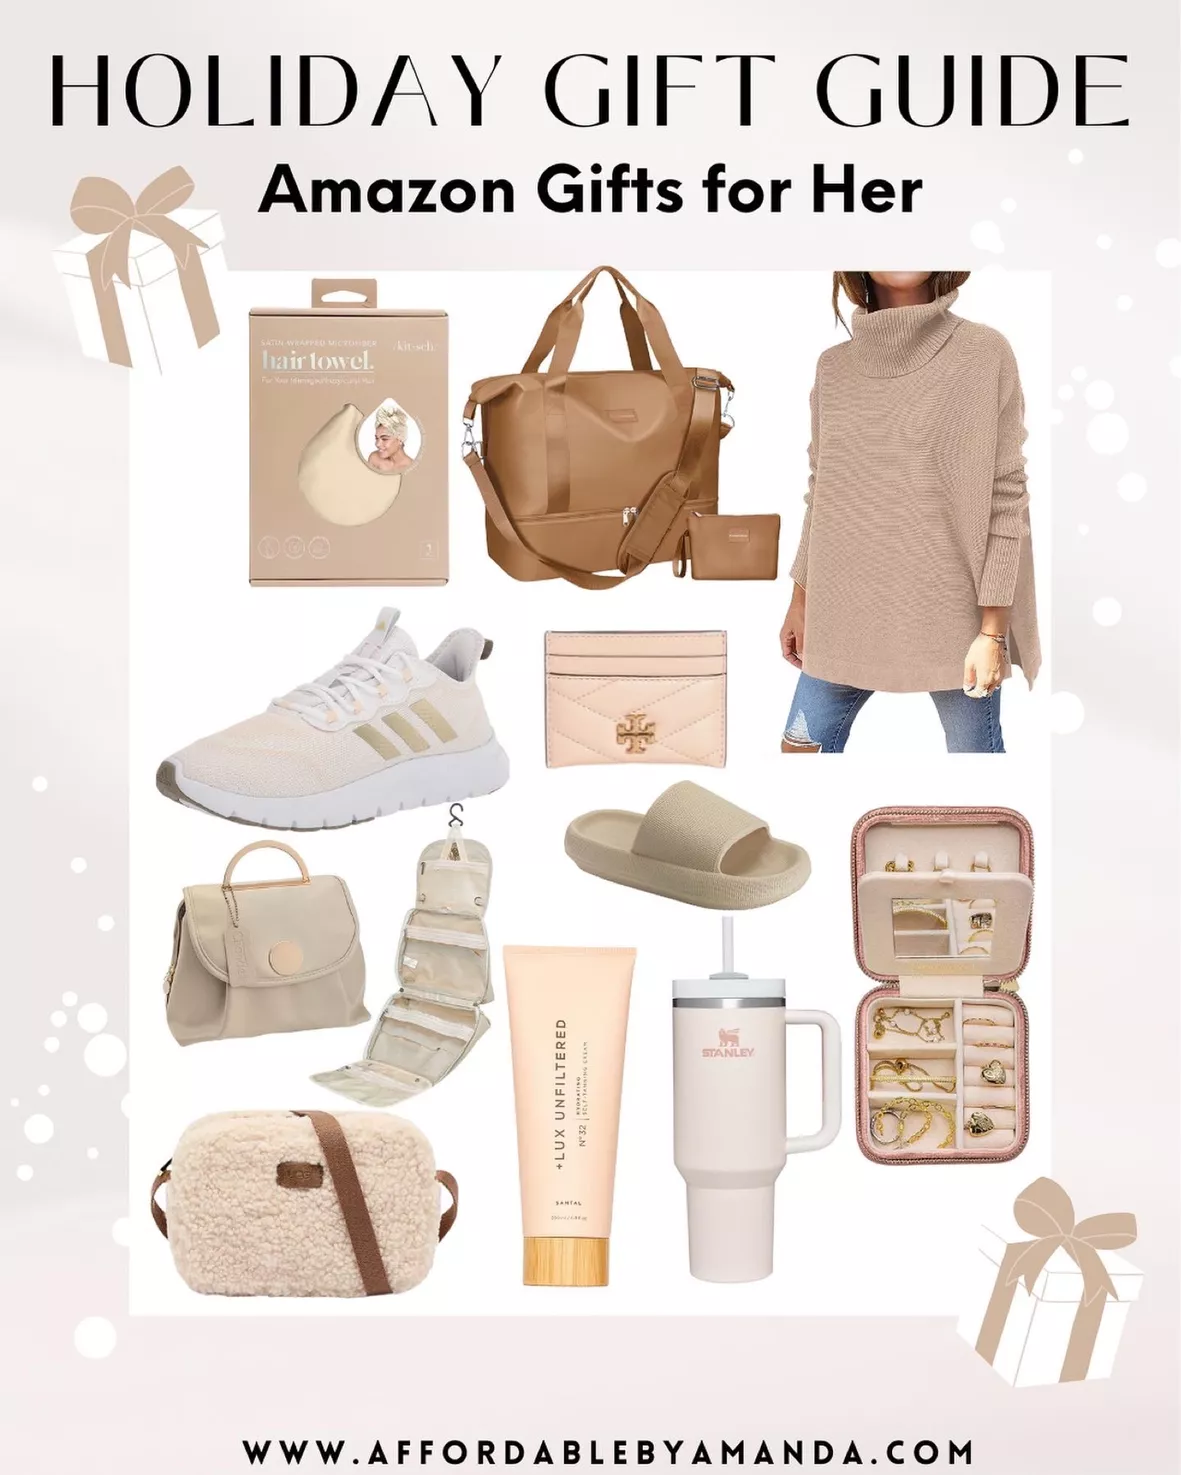 2018 Gift Guide For A Working Women - Oh What A Sight To See